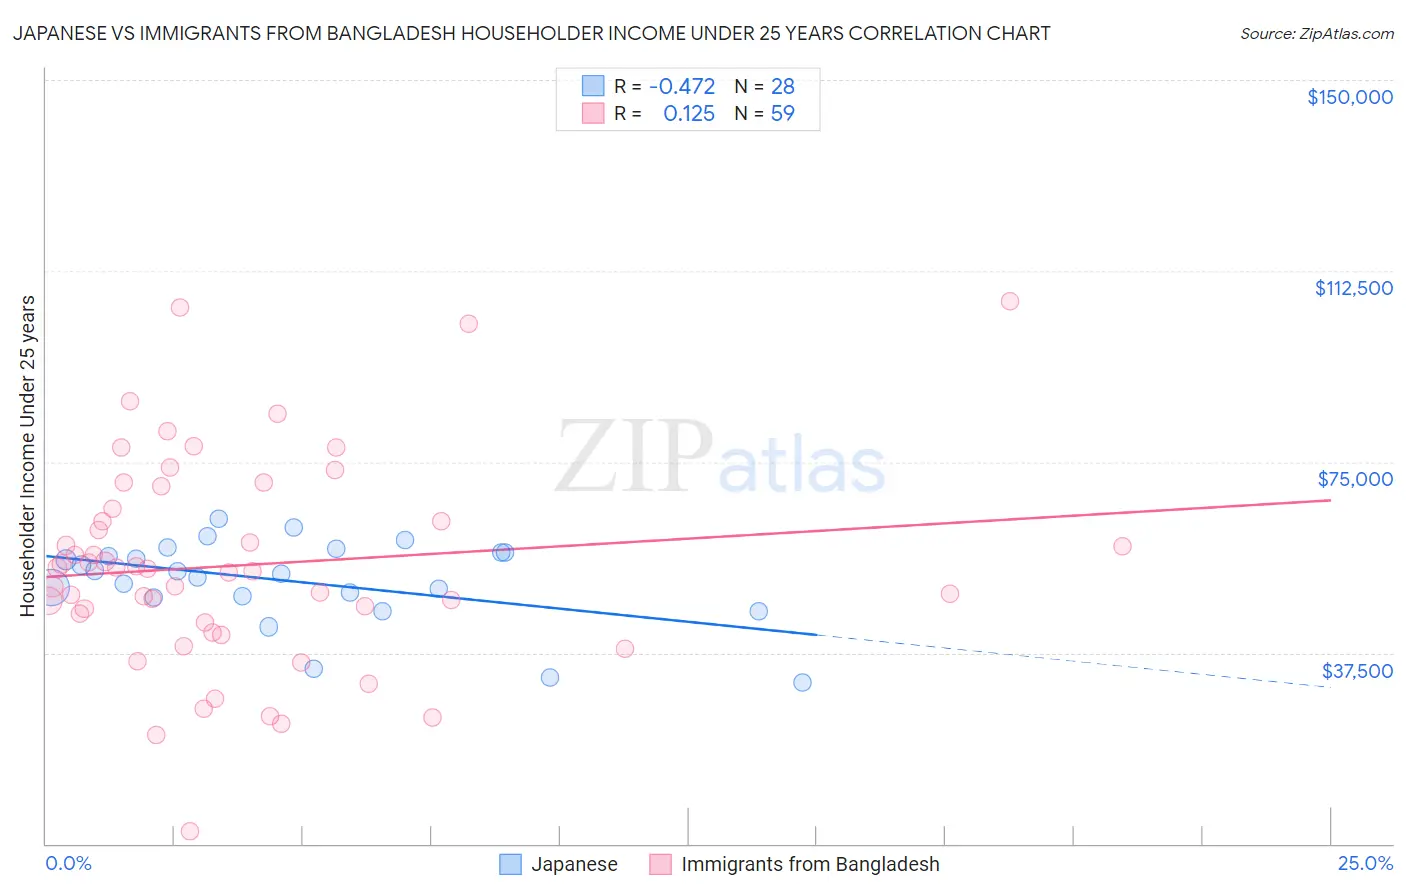 Japanese vs Immigrants from Bangladesh Householder Income Under 25 years